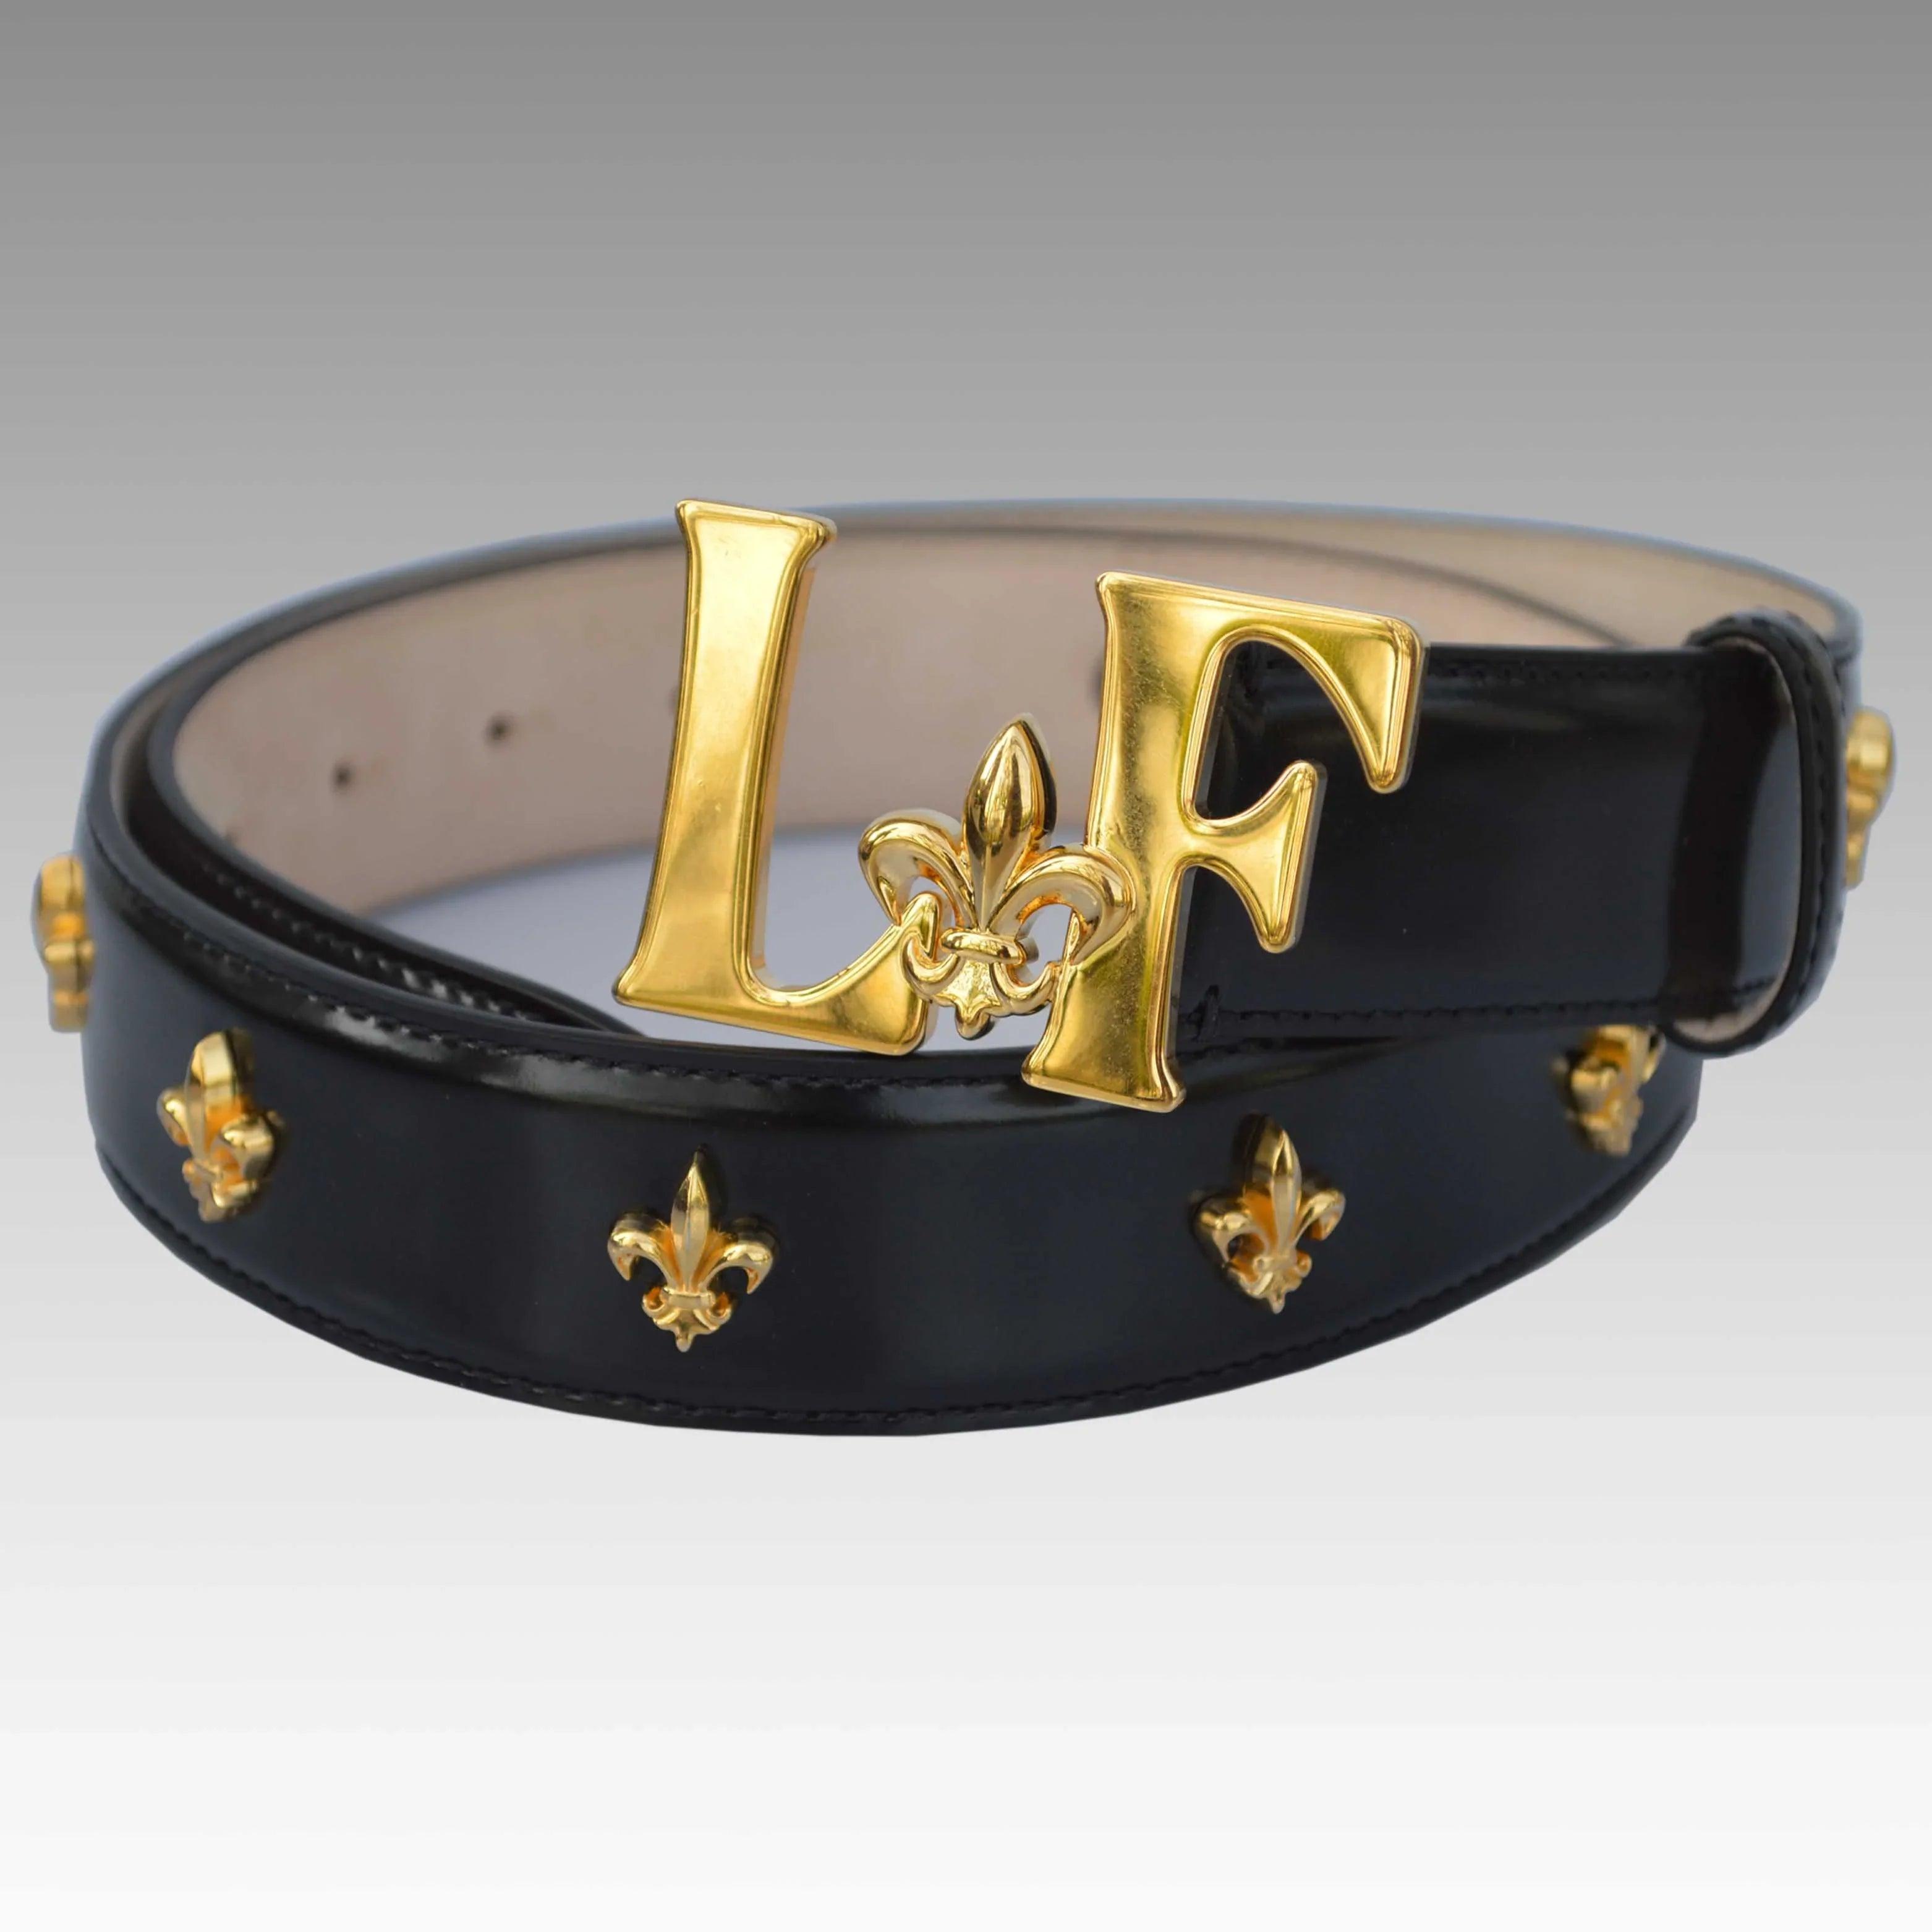 CEINTURE LYS L&F -by Maison Lords & Fools dandy, elegance, empire, frenchstyle, menfashion, menstyle, New collection, parisianstyle